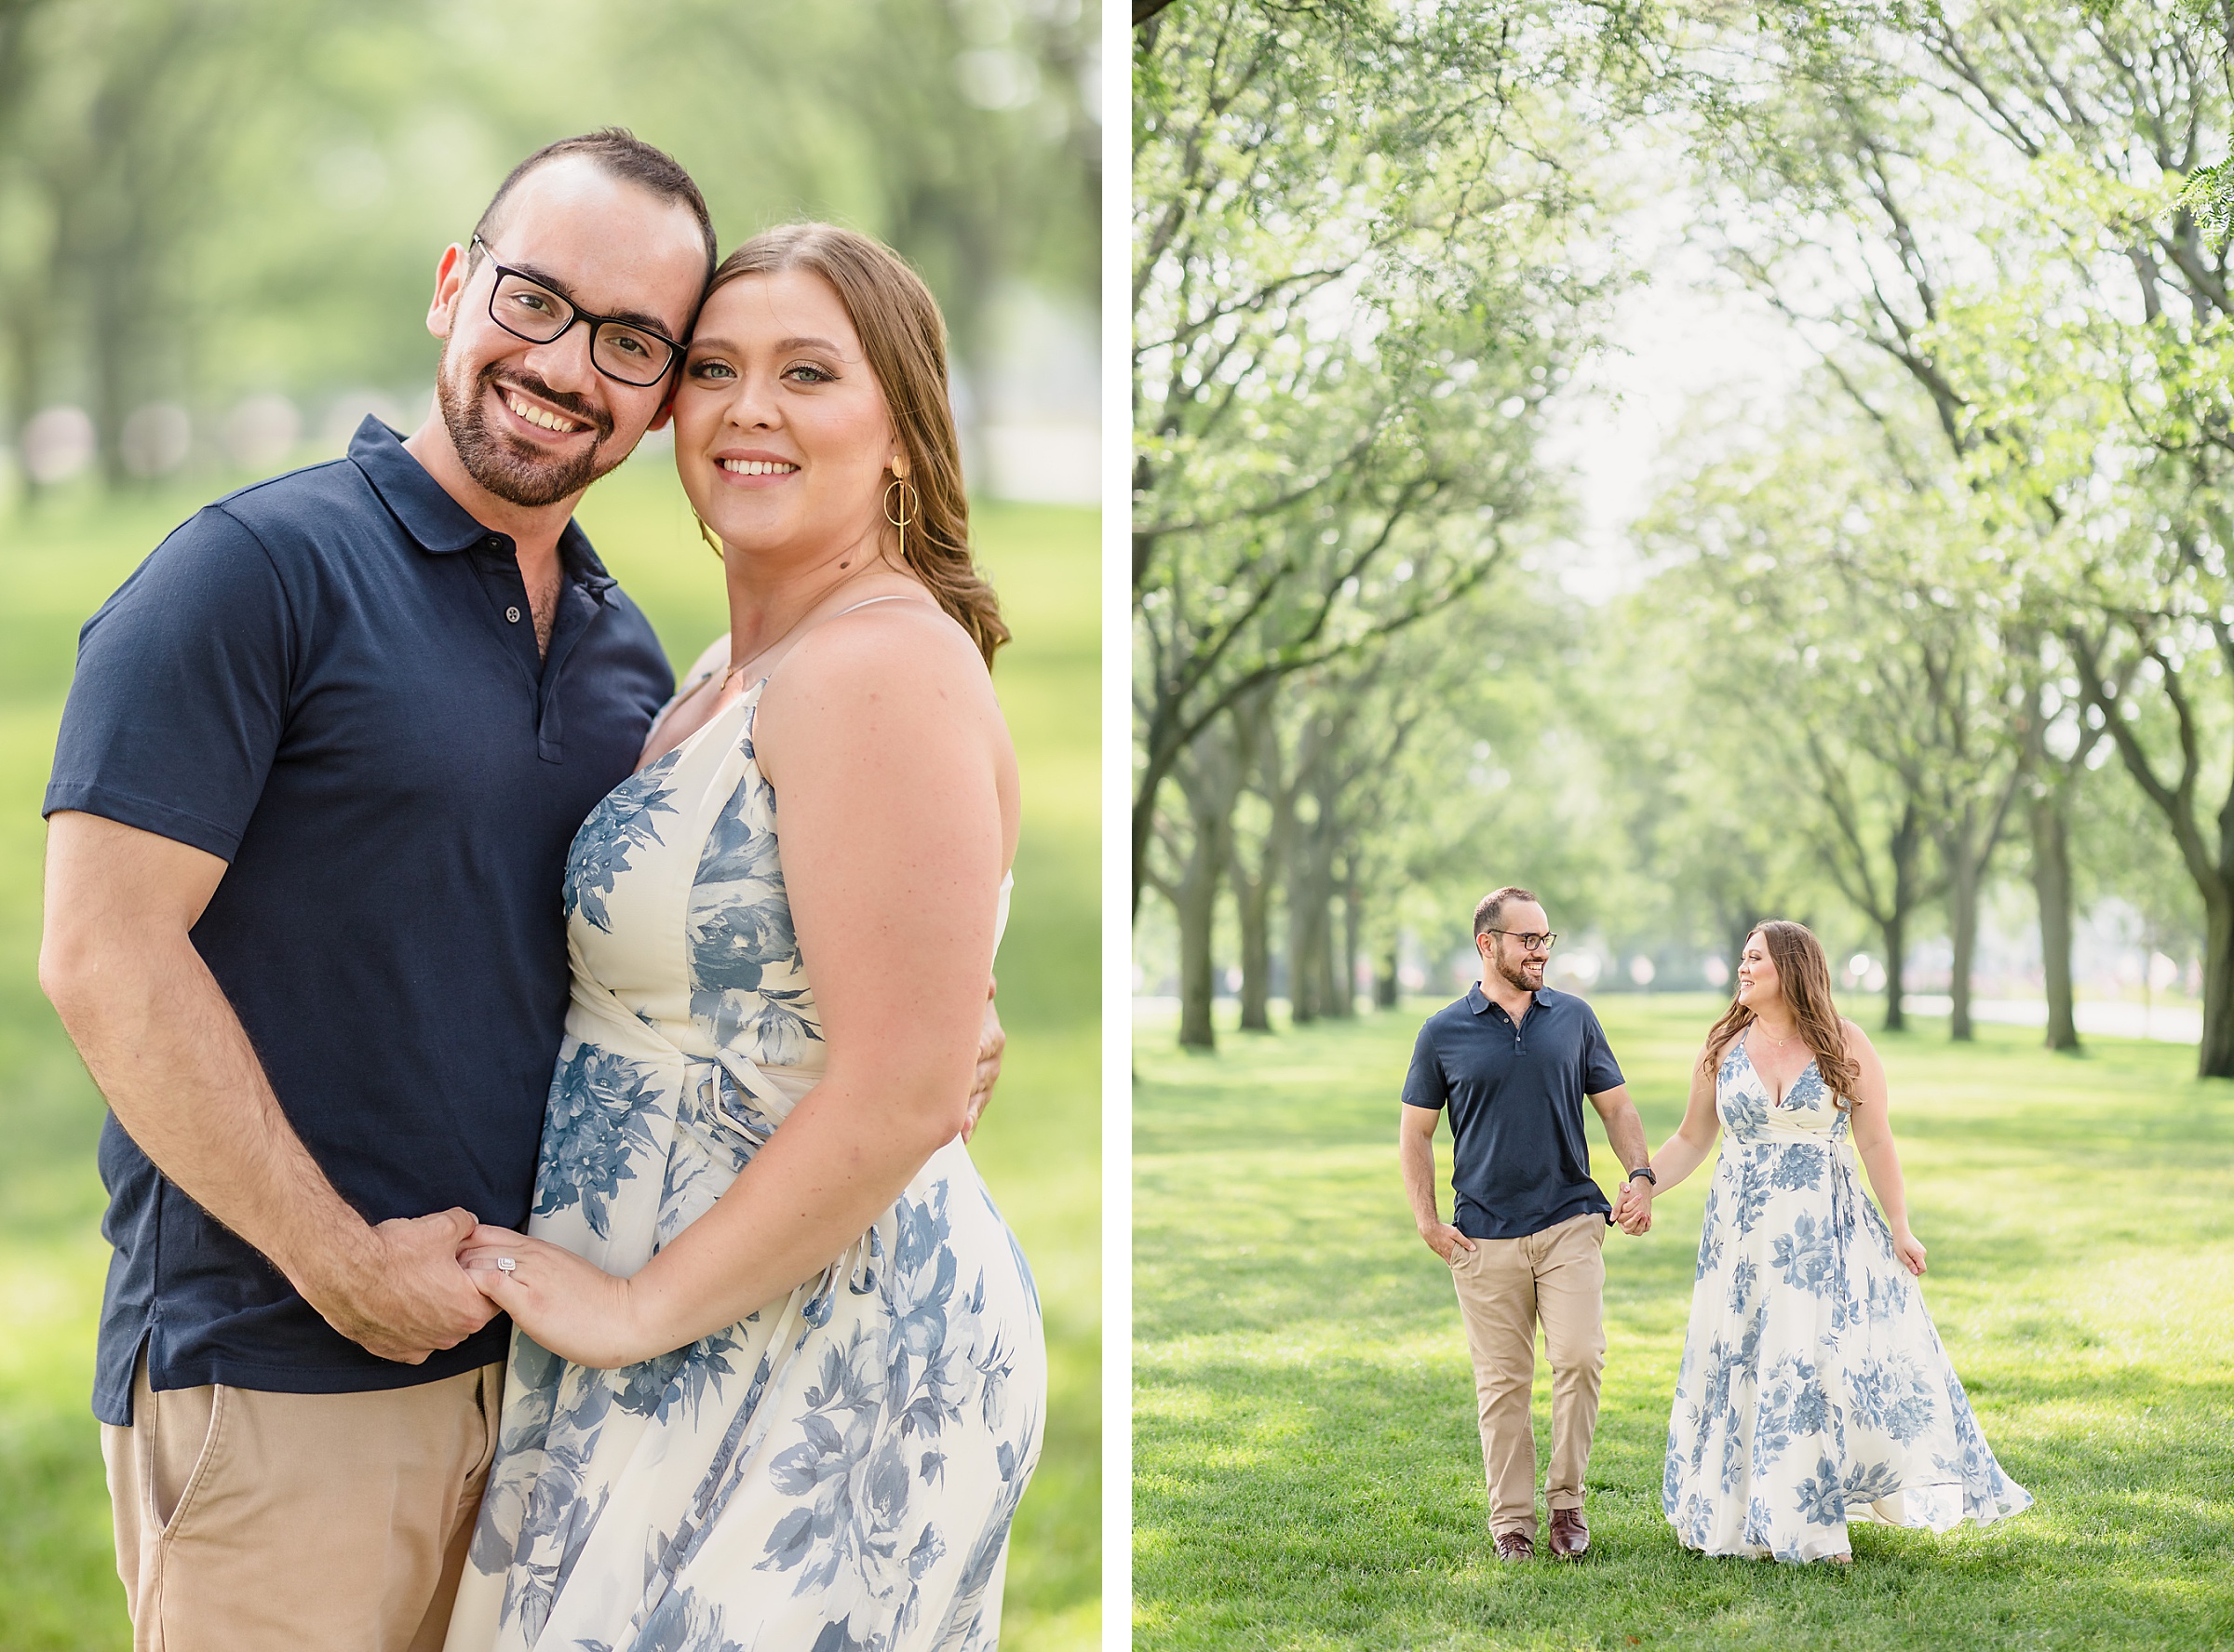 Couple embrace during their engagement session at Cantigny Park in Wheaton, Illinois.